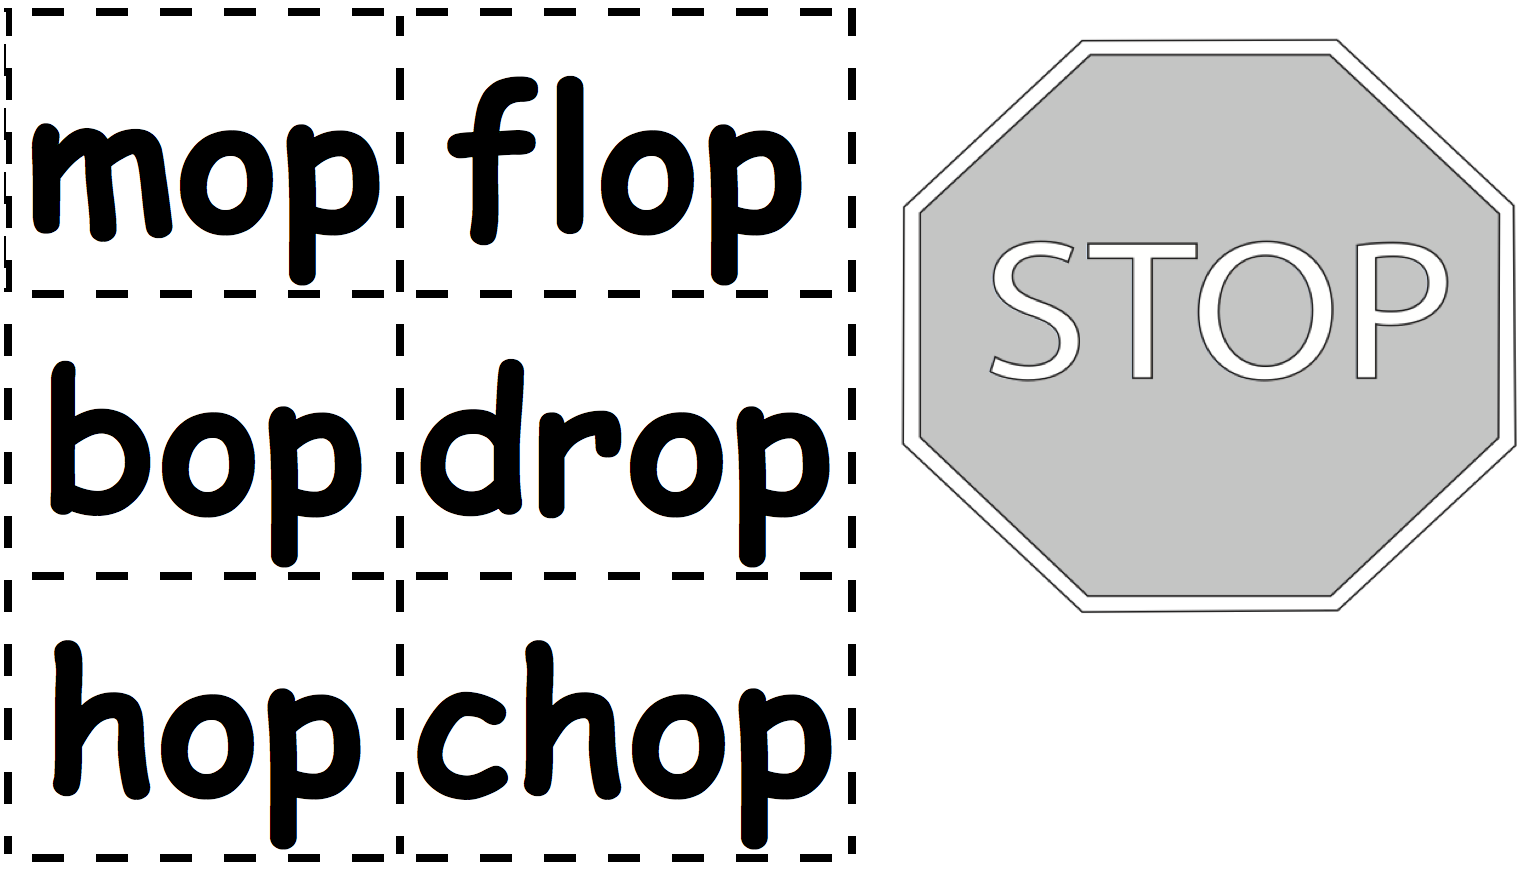 action-cards-and-stop-sign